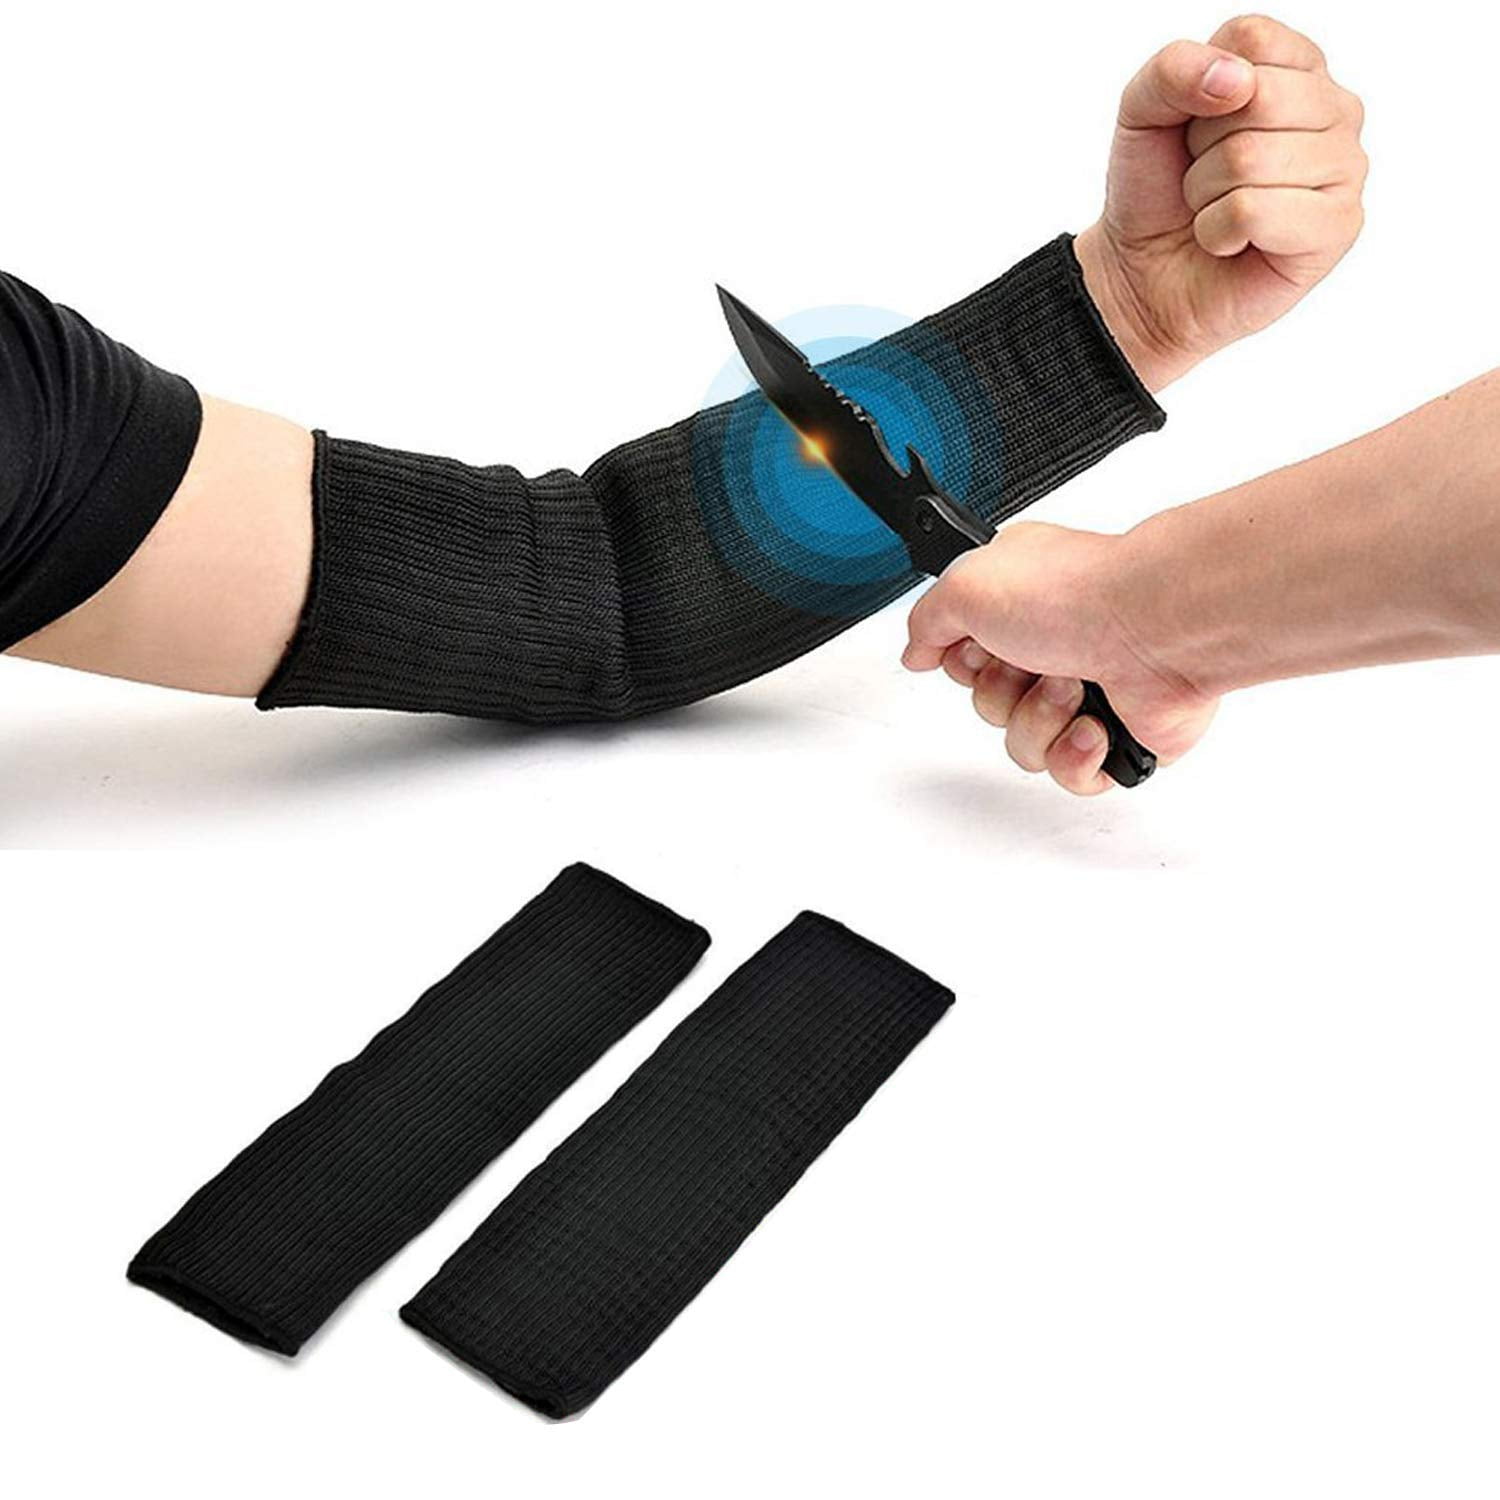 Anti-cutting Protector Bracers Arm Hands Guards Steel Wire Long Gloves Black 